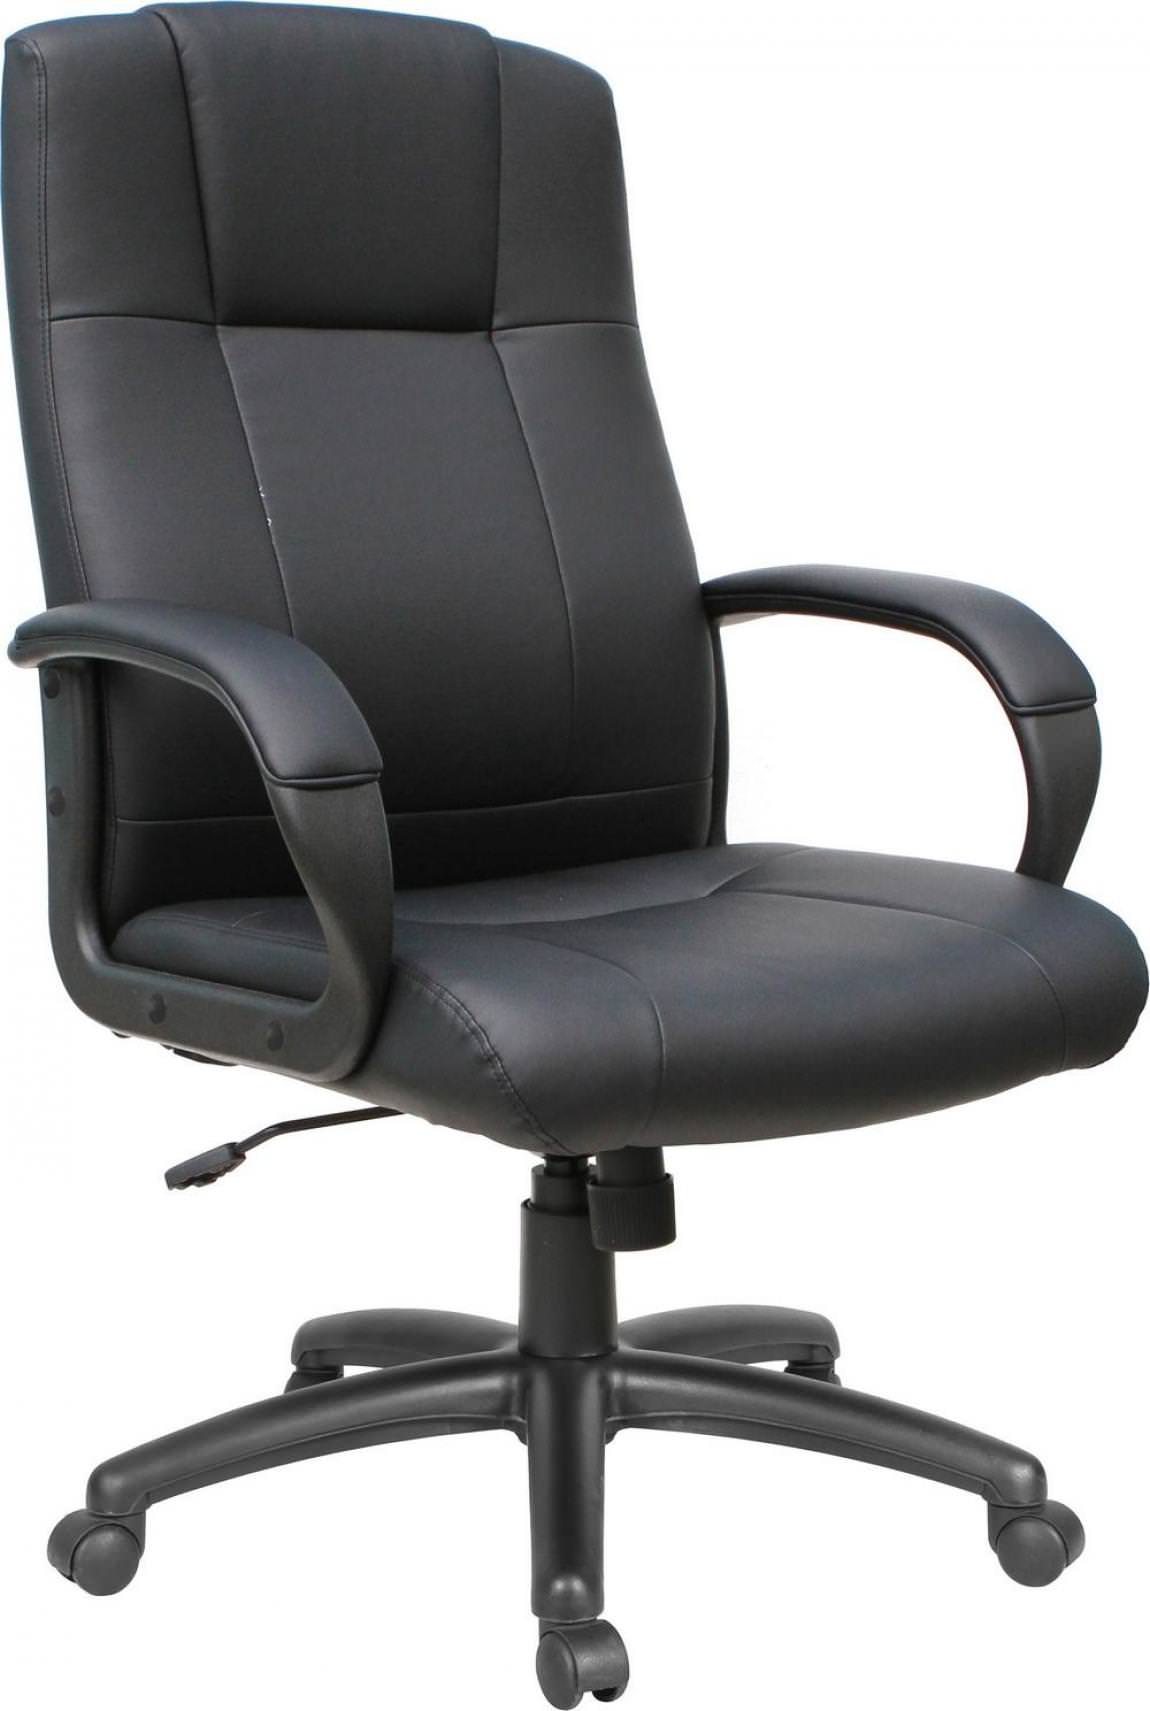 High-Back Black Management Chair with Upholstered Arm Caps